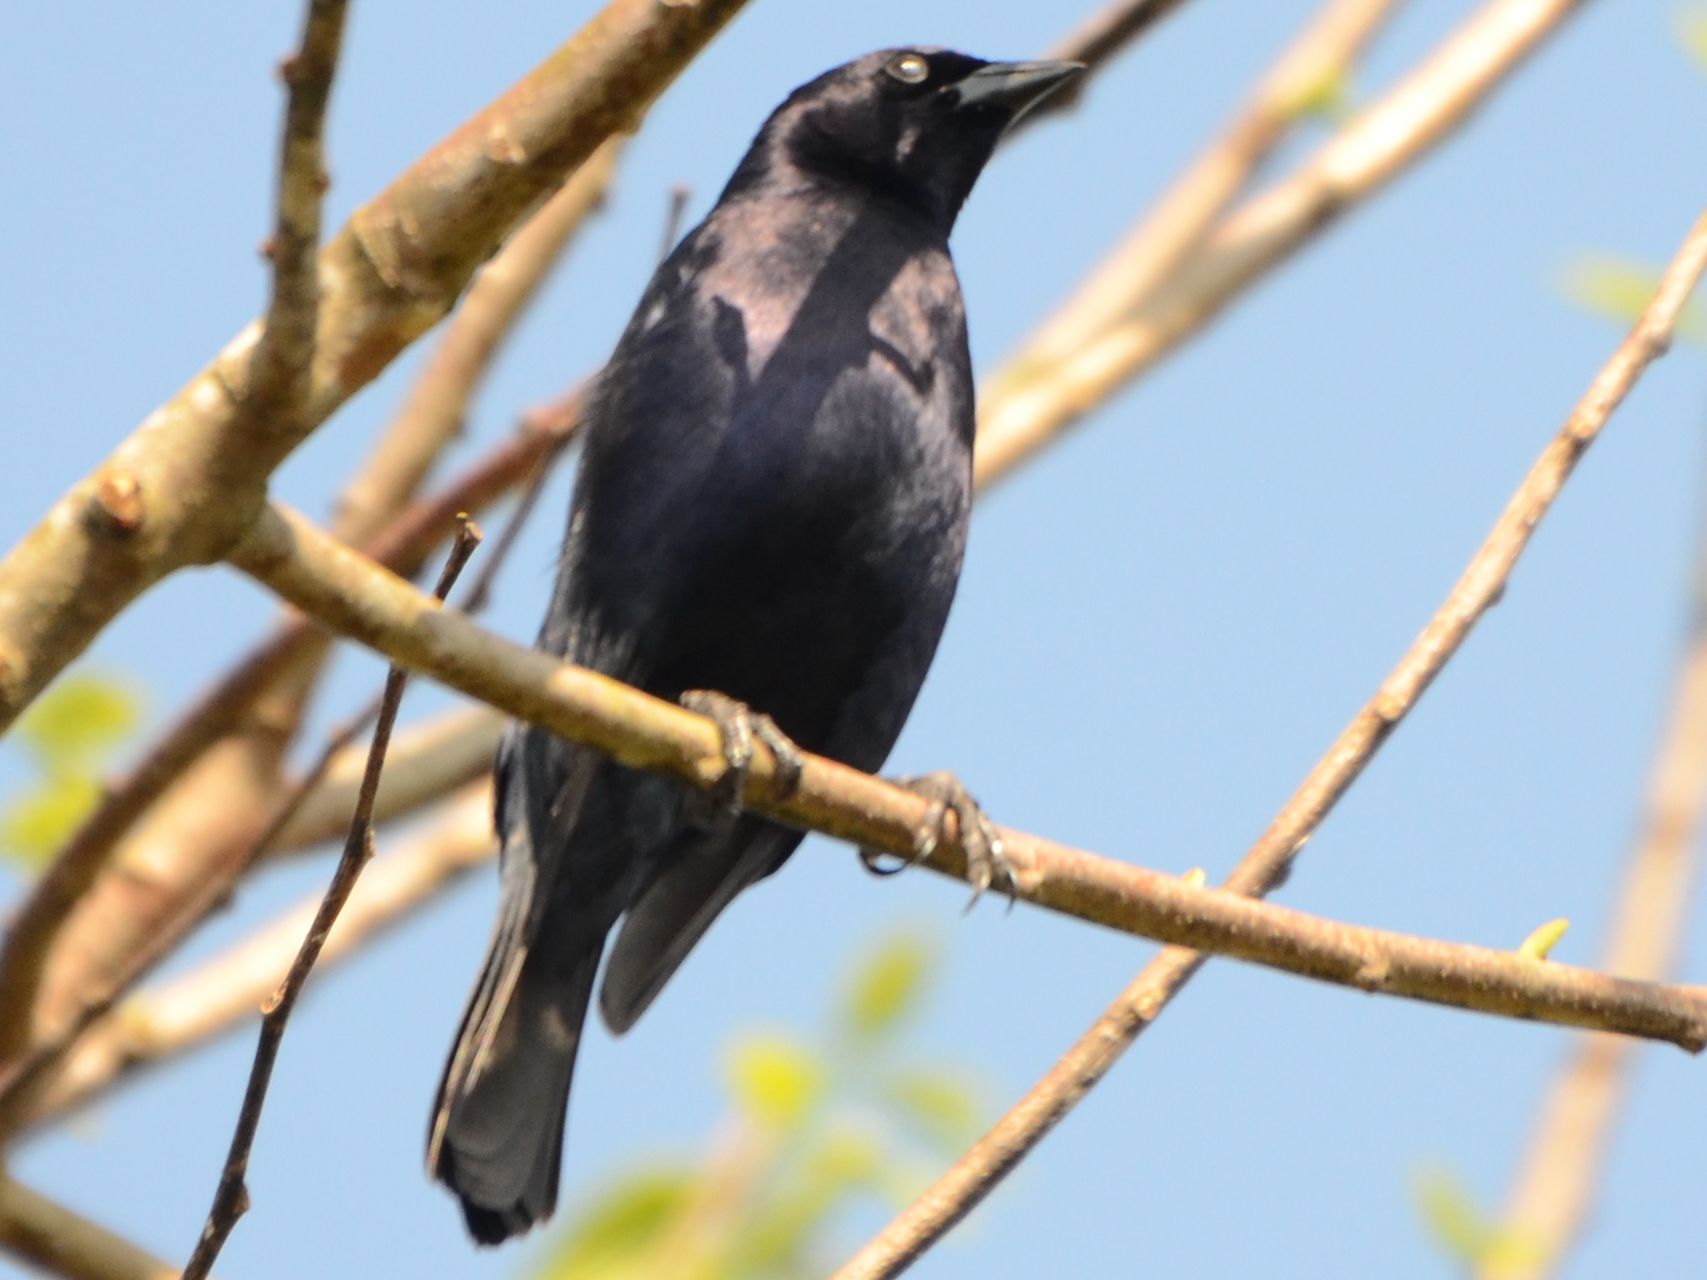 Click picture to see more Shiny Cowbirds.